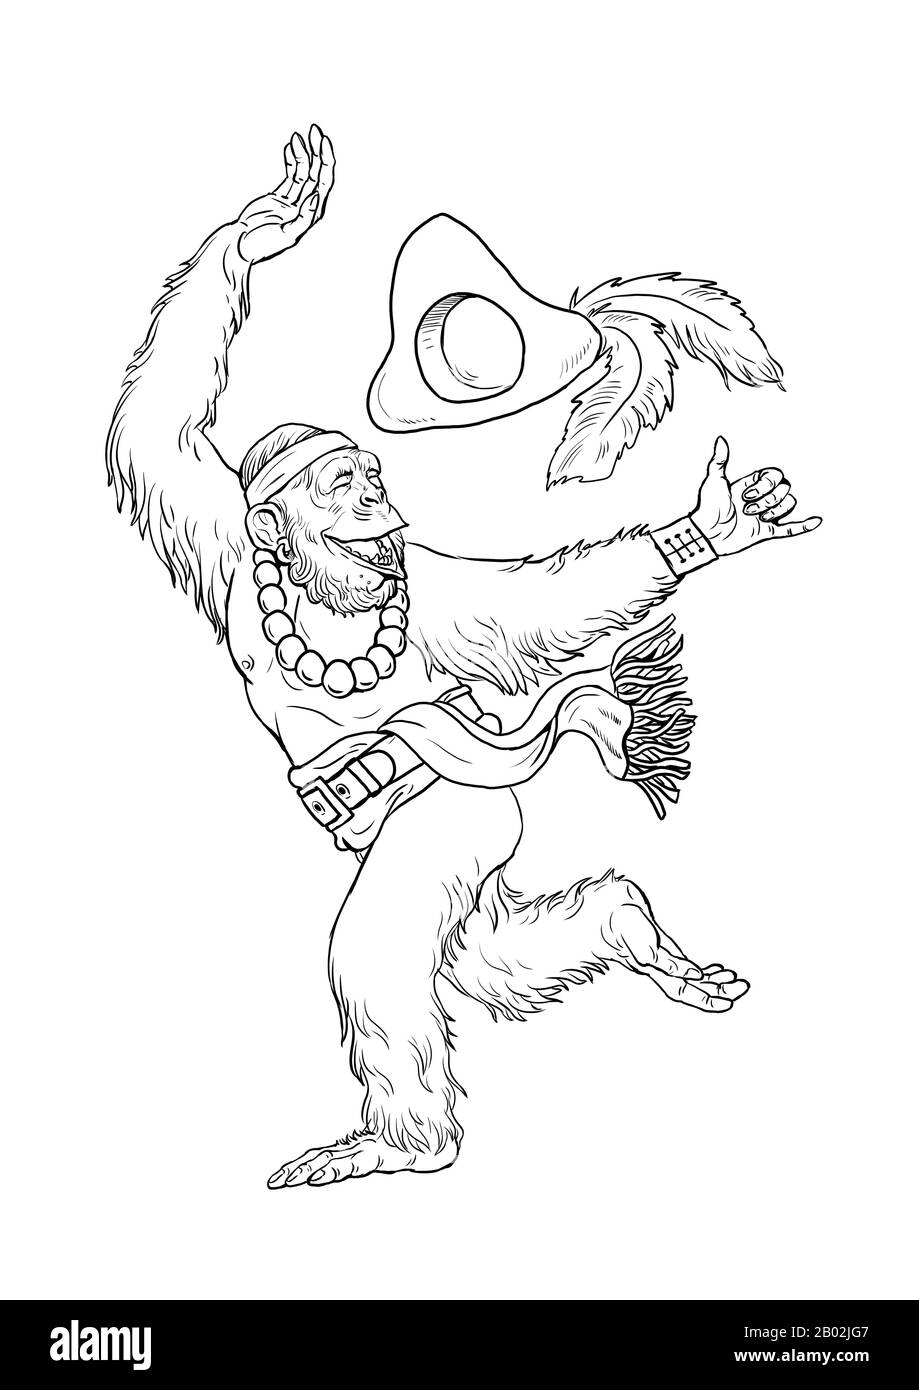 Chimpanzee pirate dances coloring page. Outline illustration. Monkey and apes pirates coloring sheet. Stock Photo